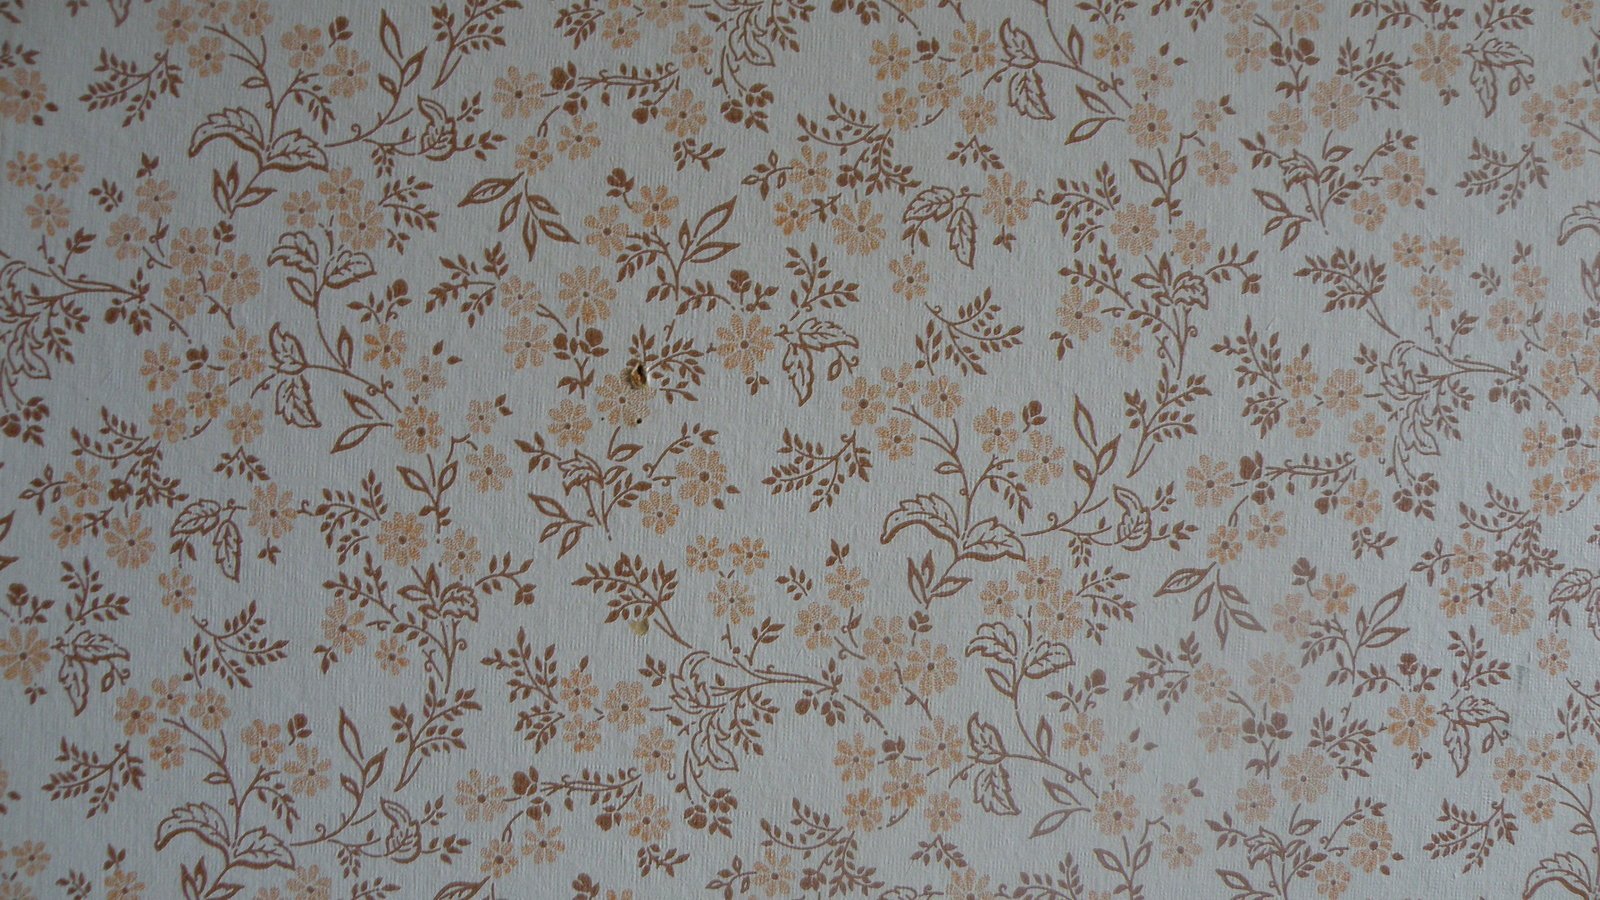 the flower pattern is on a wallpaper that is beige and brown